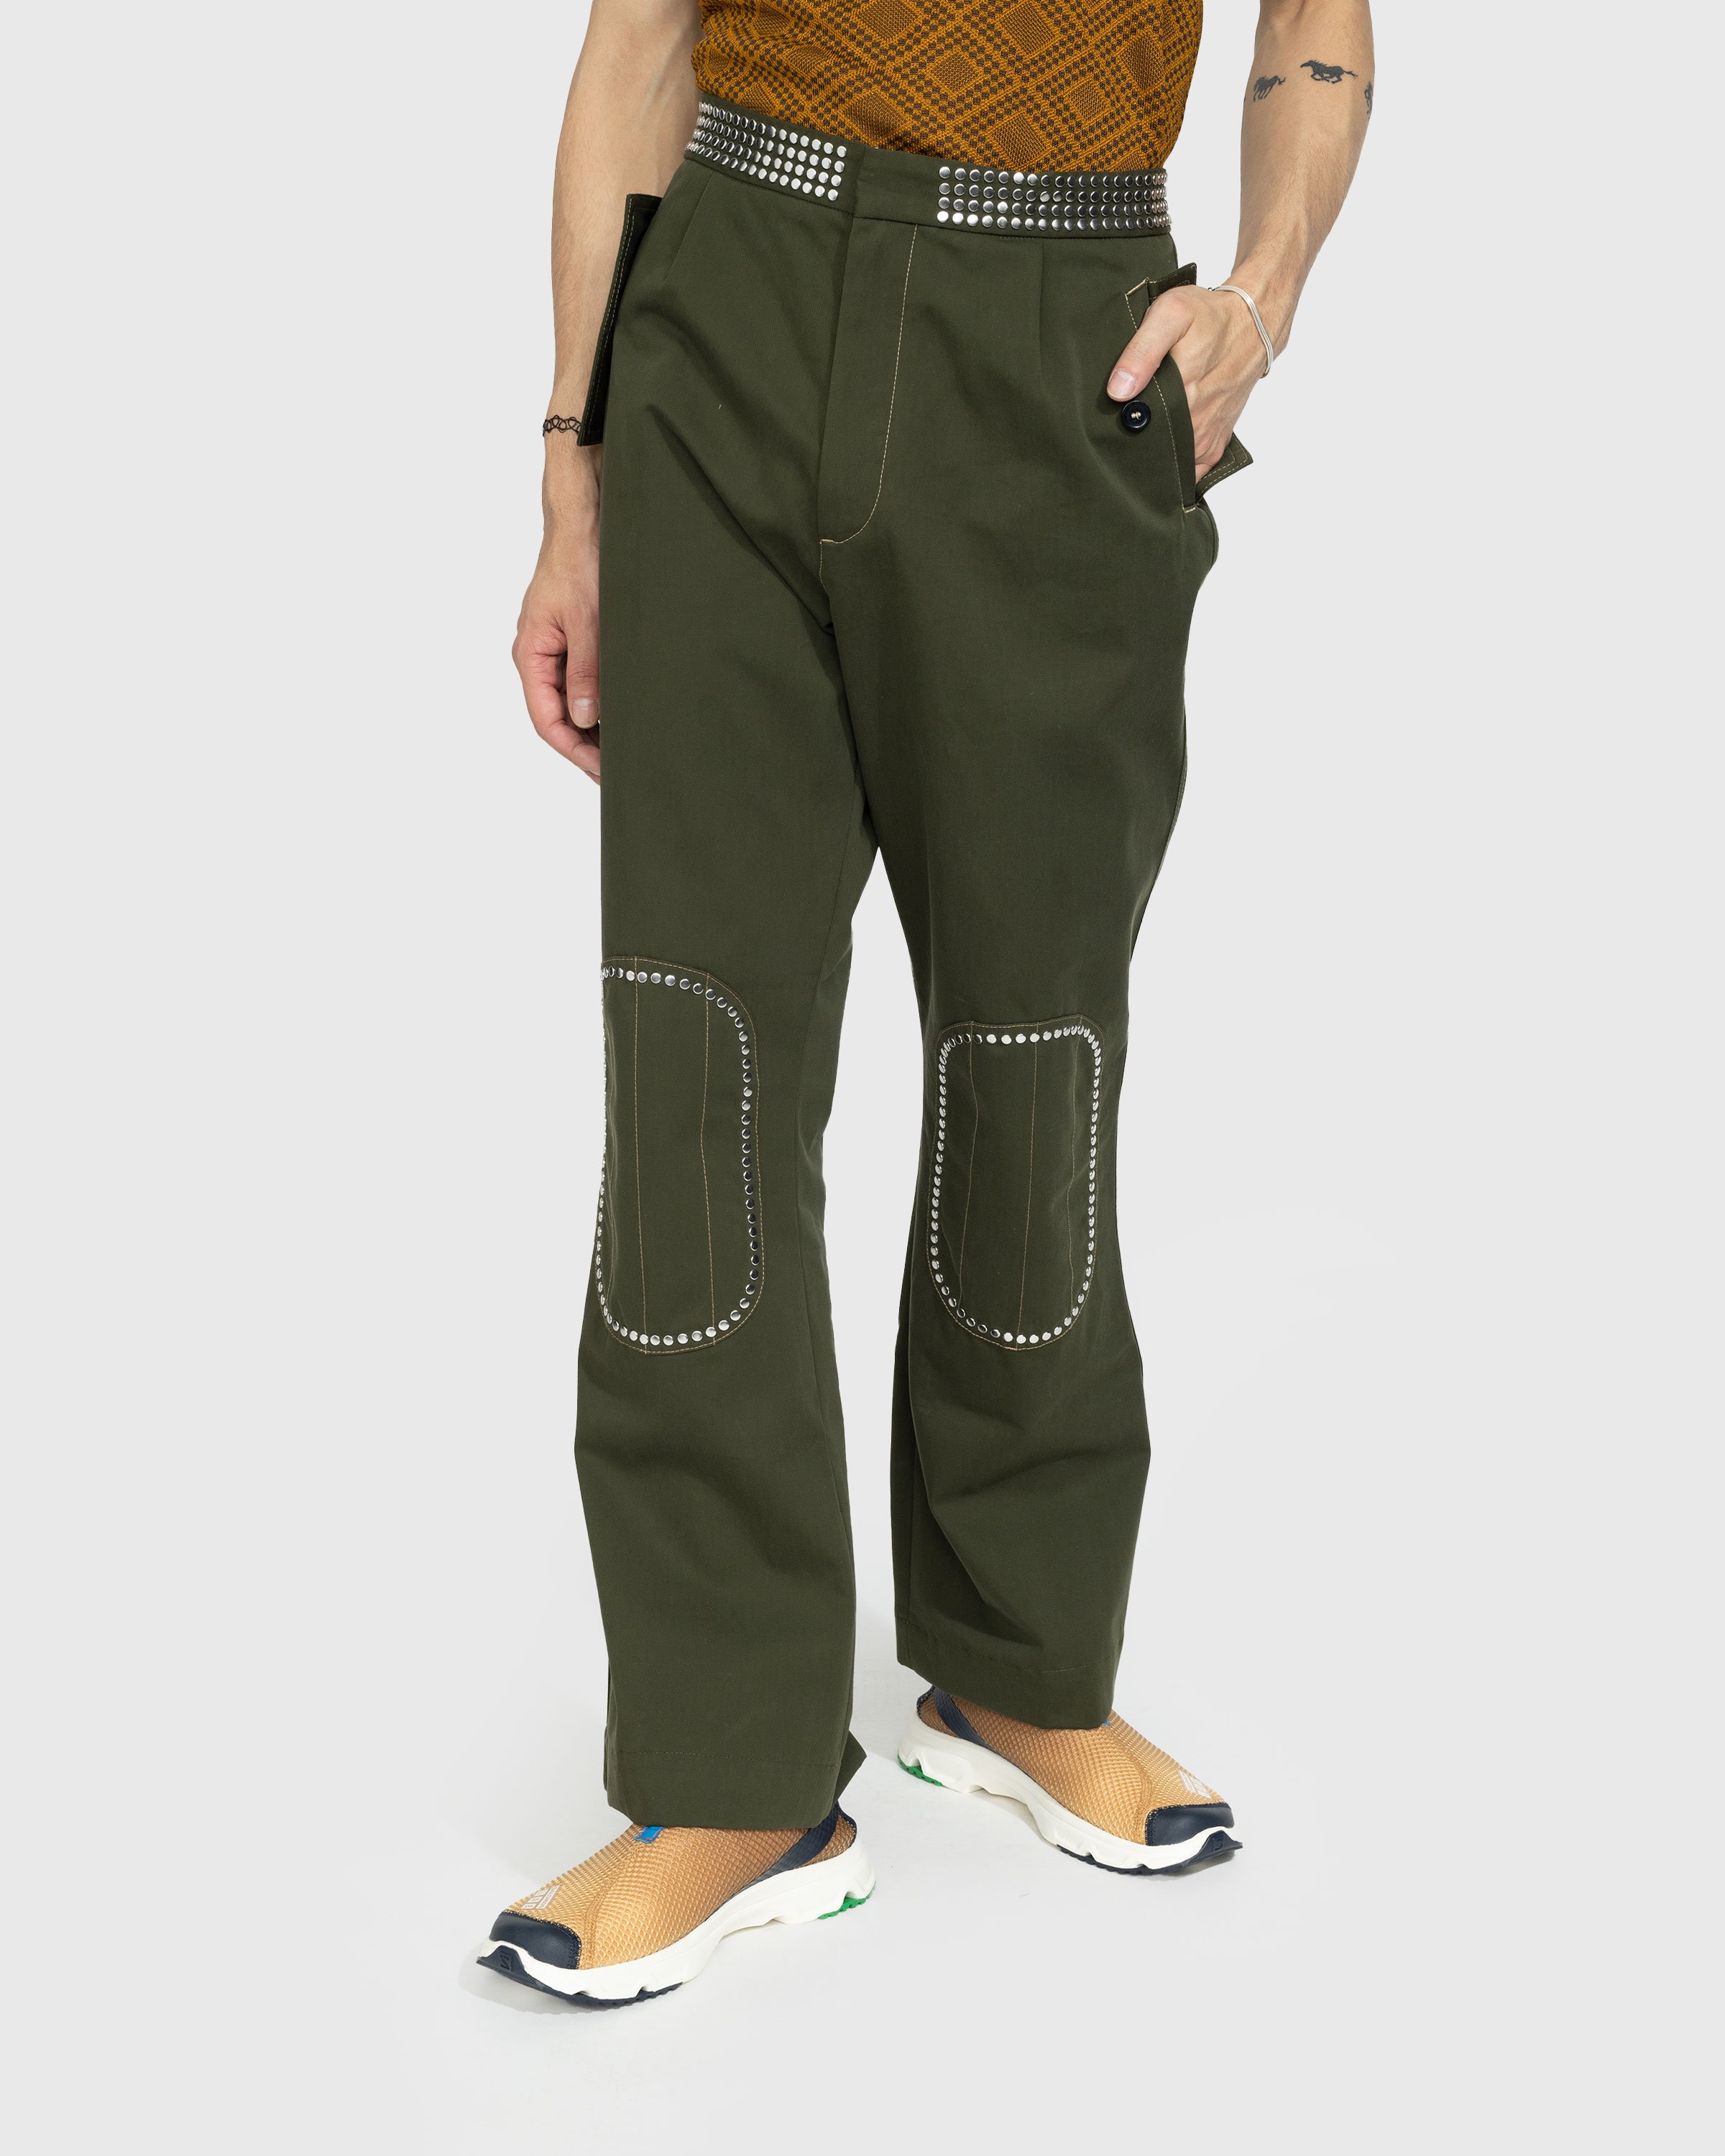 Wales Bonner - Tomorrow Trousers - Clothing - Green - Image 4